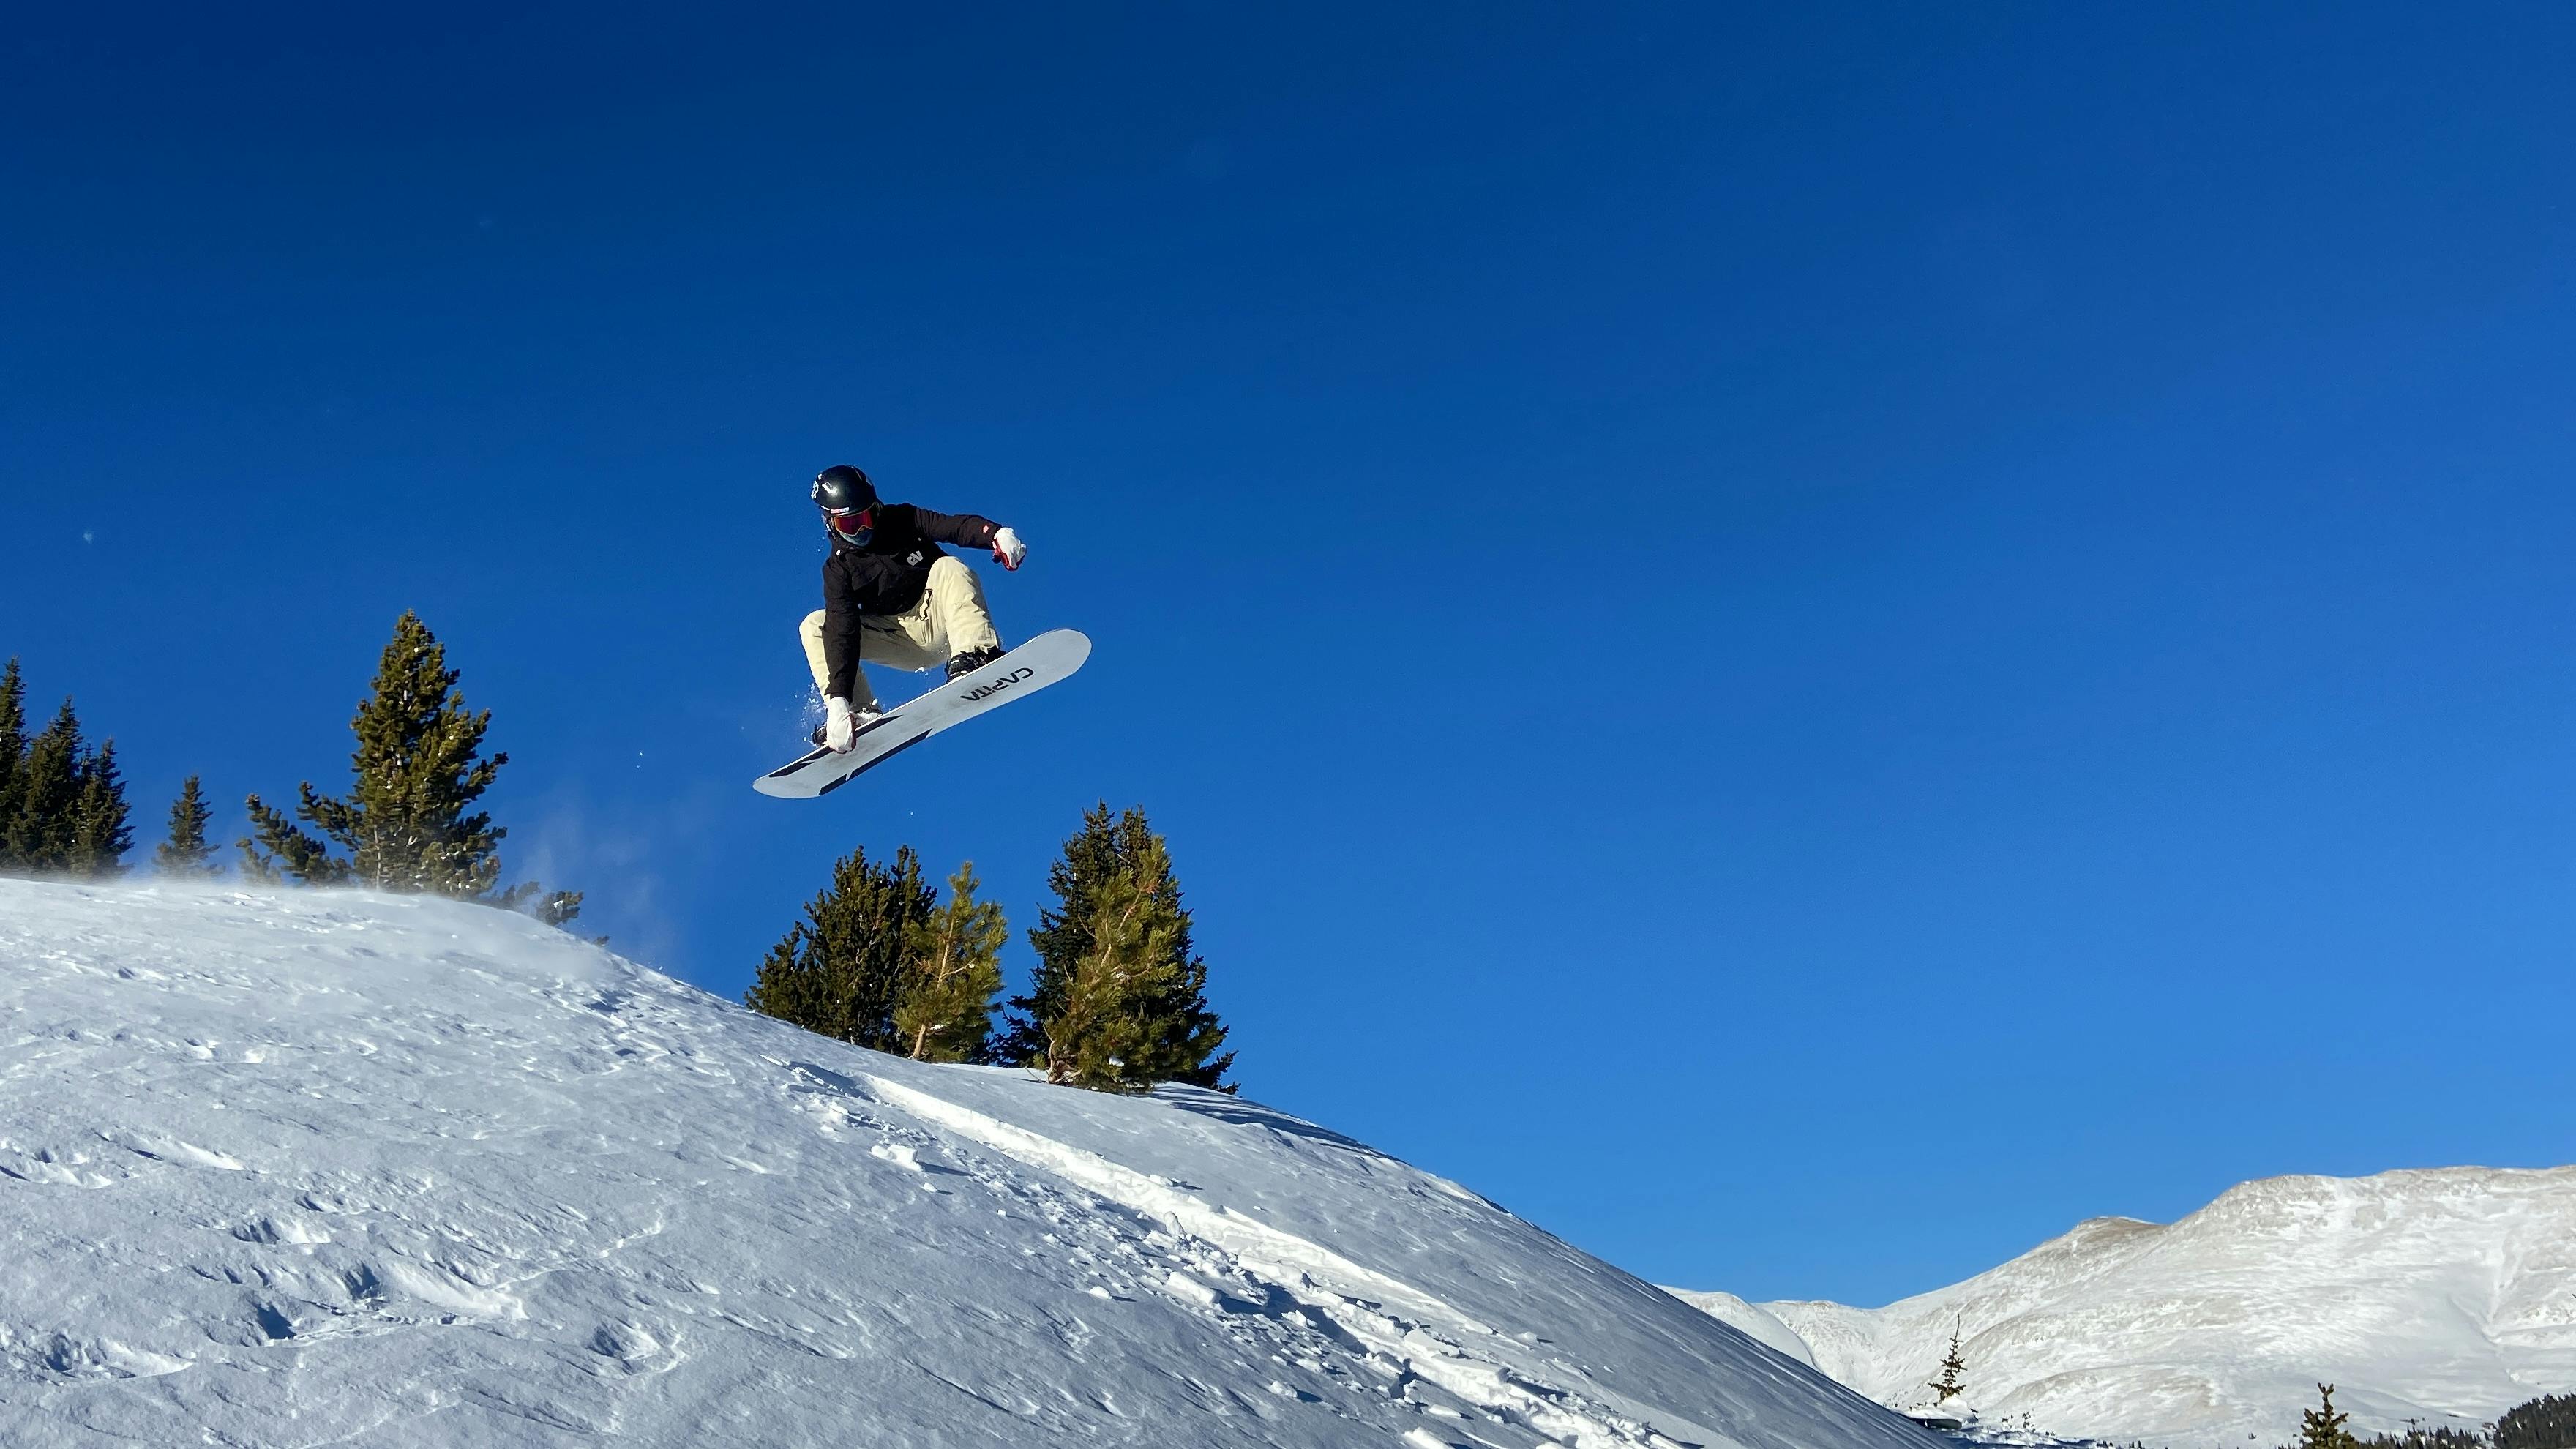 A man does a grab on a snowboard as he goes off a jump.